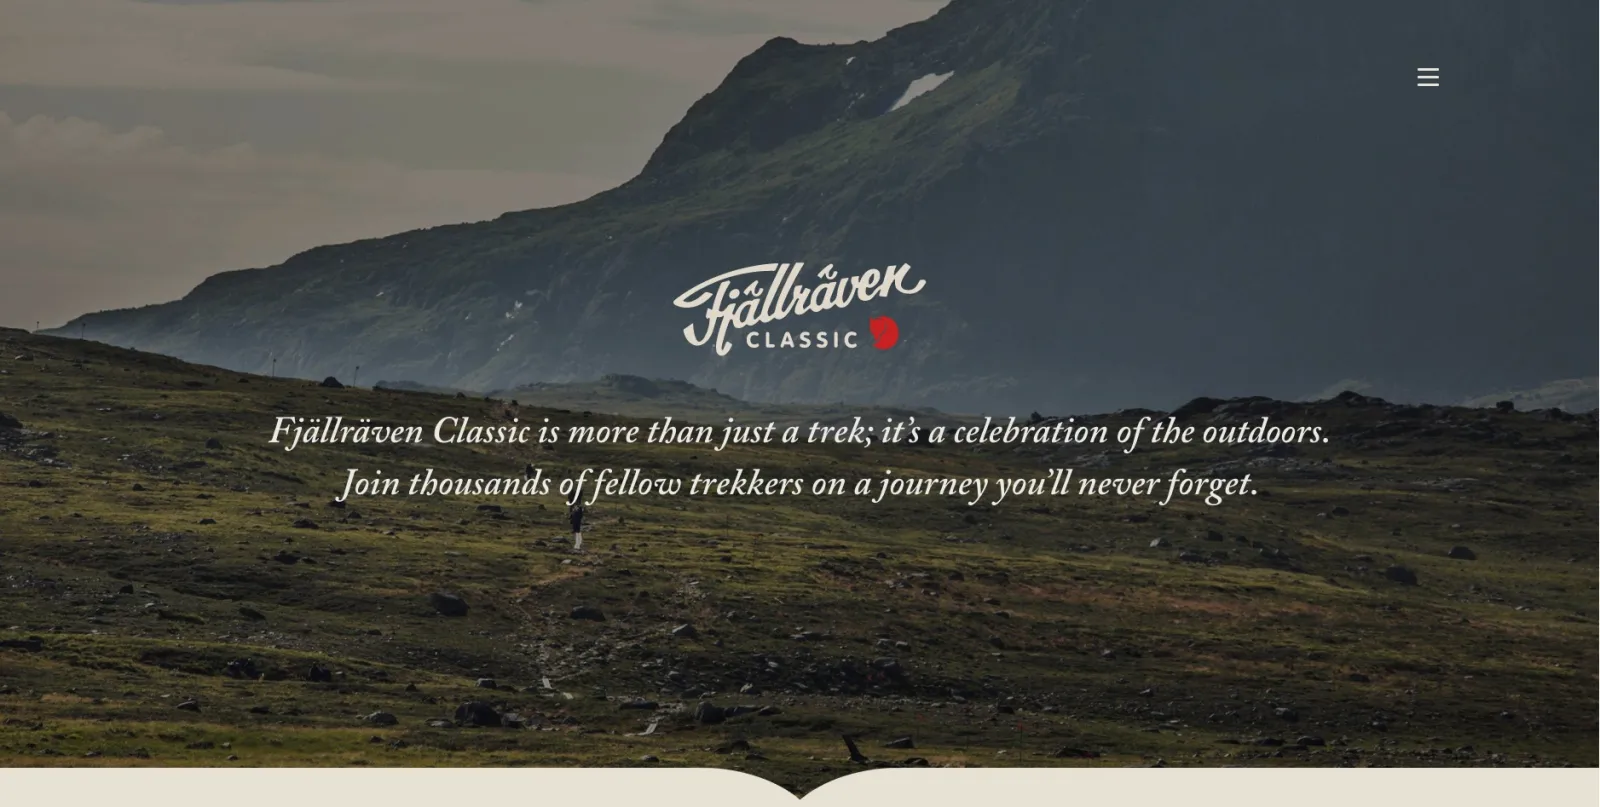 Fjällräven Classic - an online trekking event for hiking enthusiasts